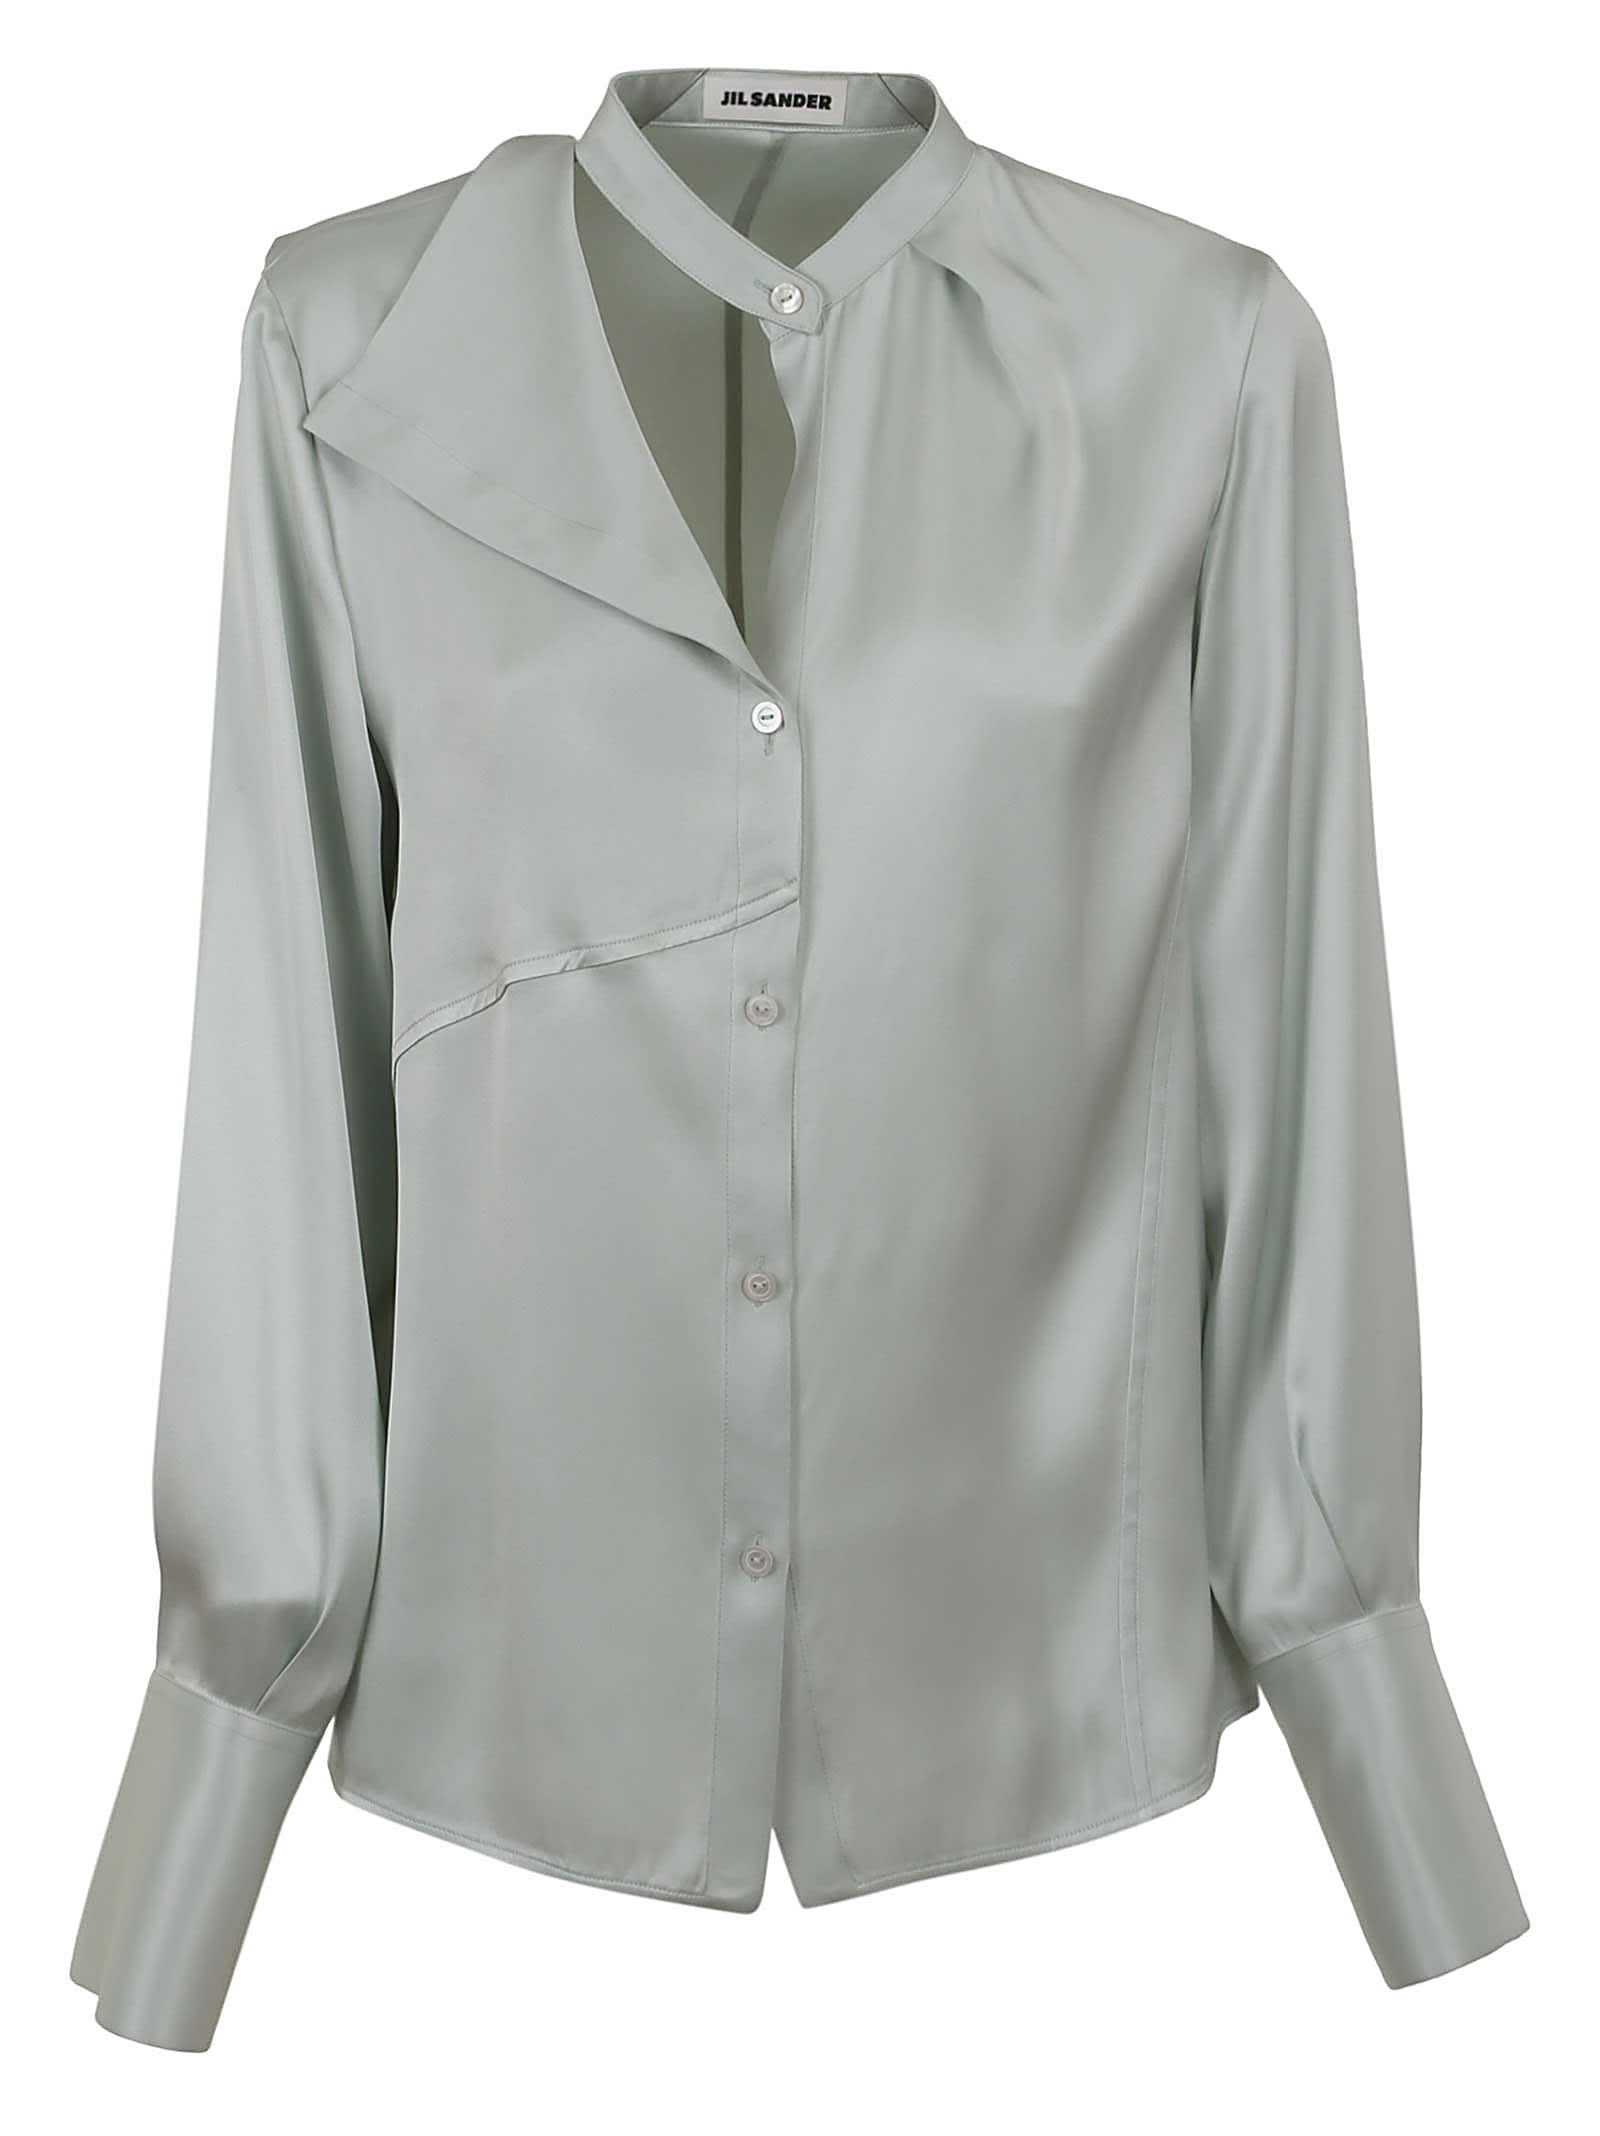 Fitted Blouse With Stand Collar, Draped Front.